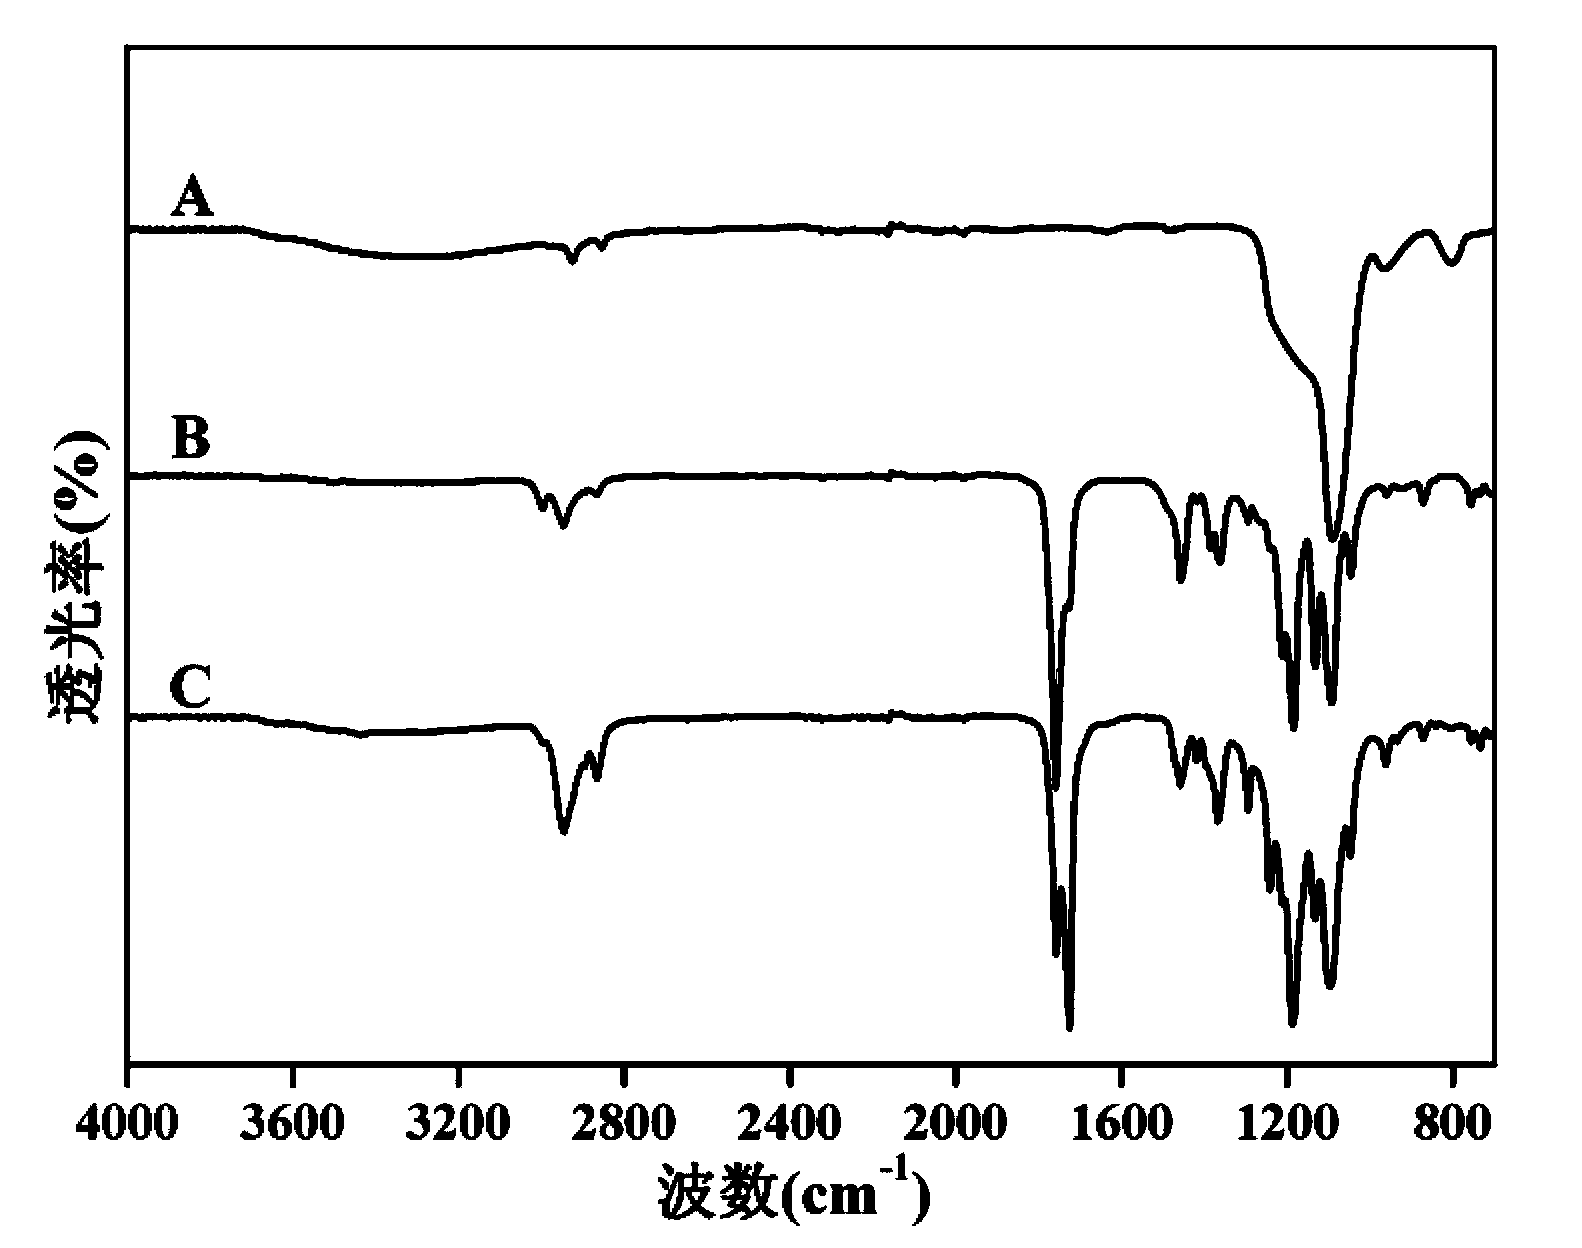 Method used for preparing microcarrier/polymer composite scaffold by electro-deposition